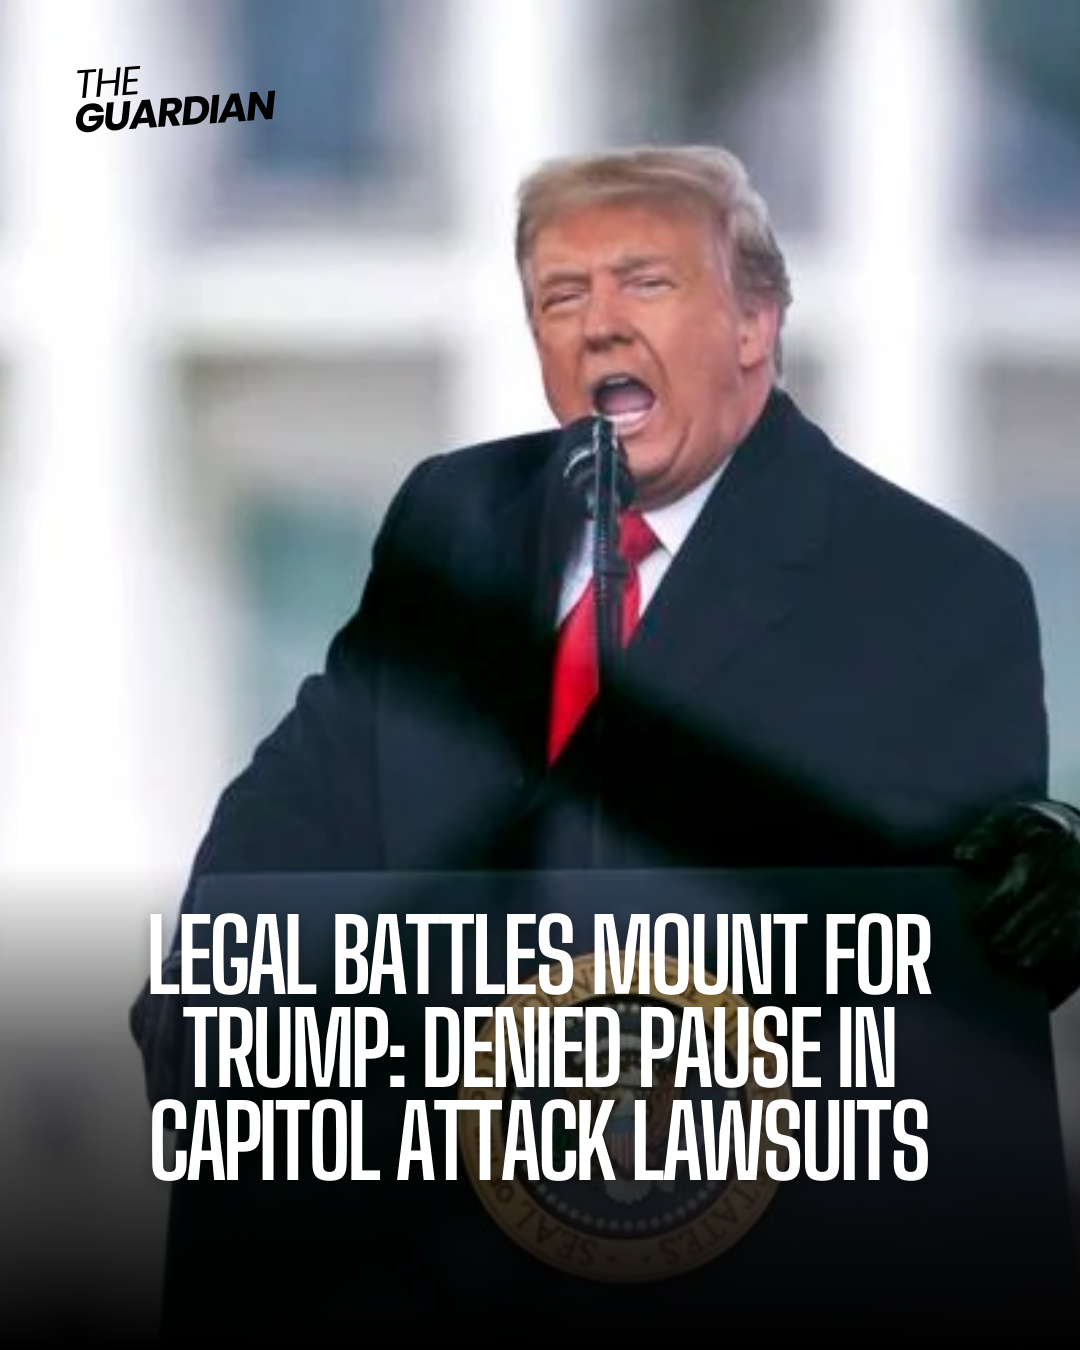 Donald Trump lost an attempt Thursday to prevent a series of lawsuits accusing him of encouraging the attack on the US Capitol.